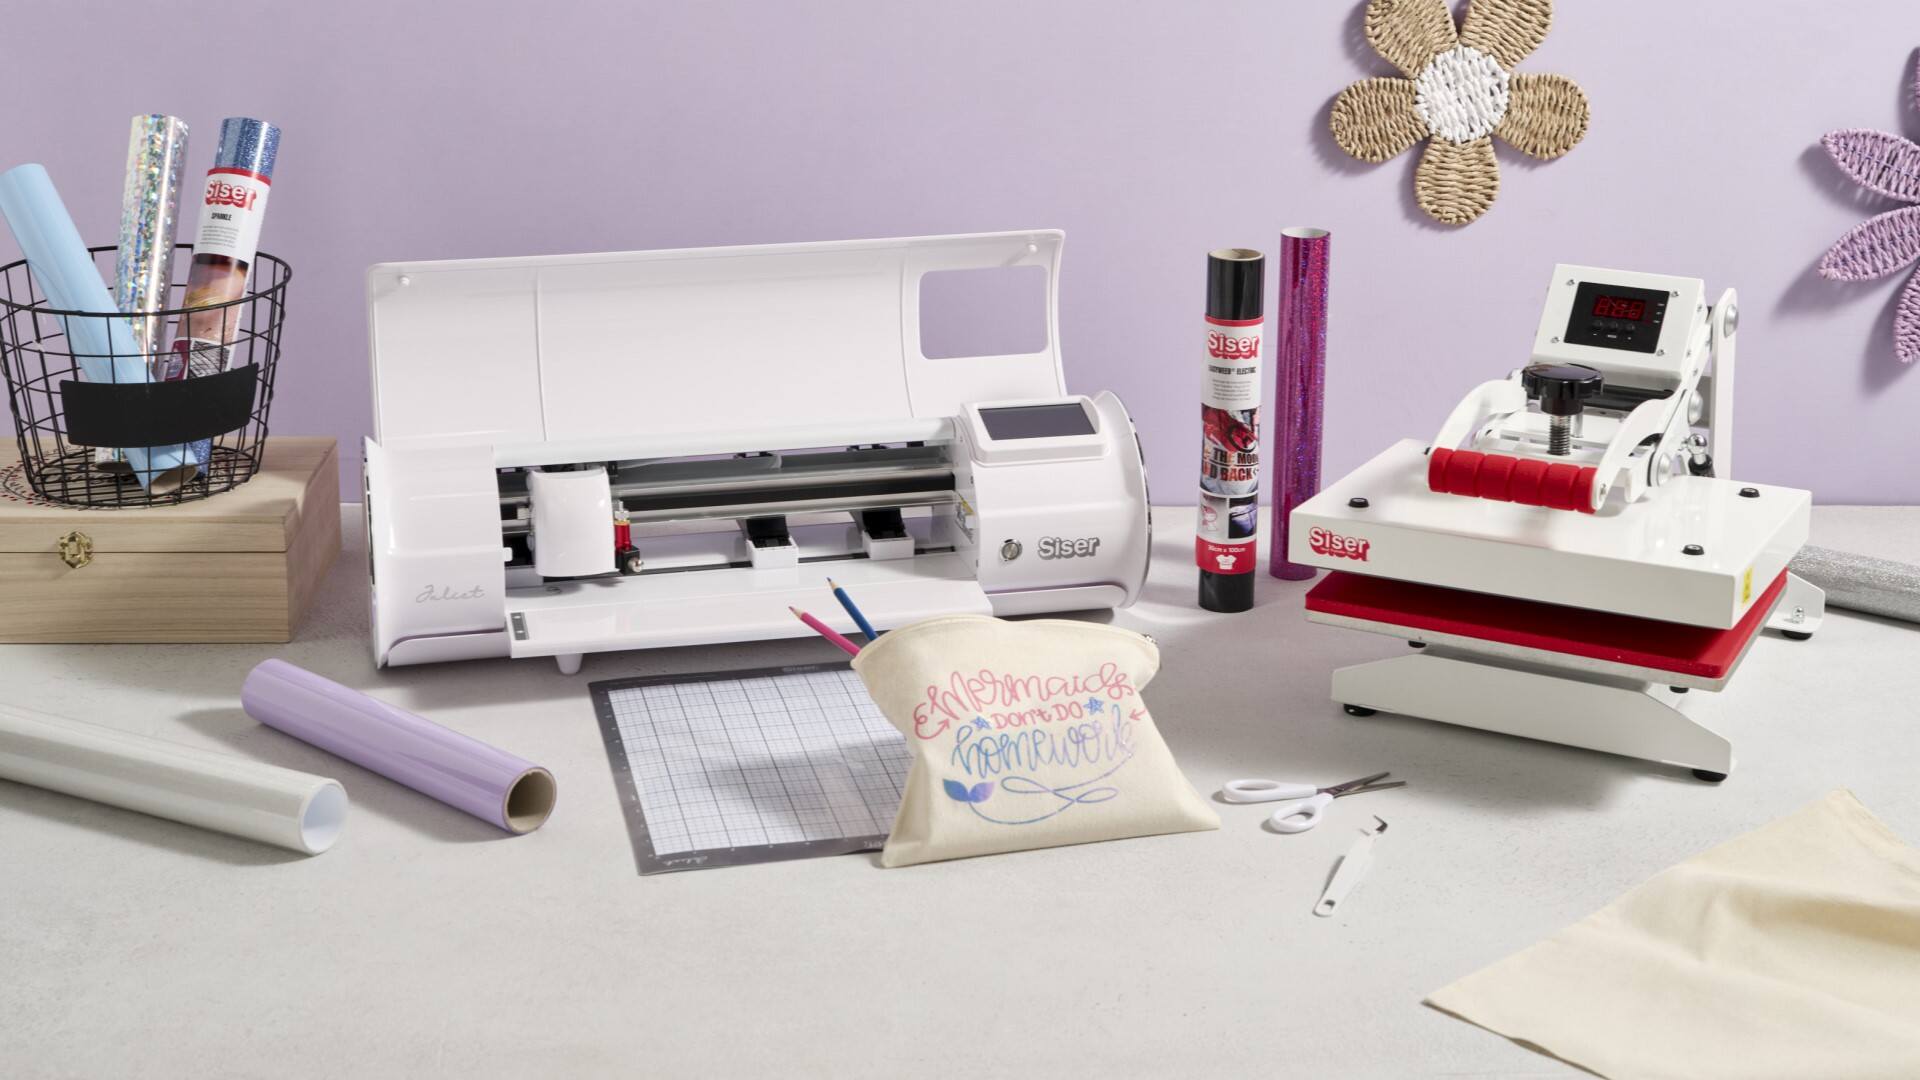 Customise your items with a cutting and heat press machine!